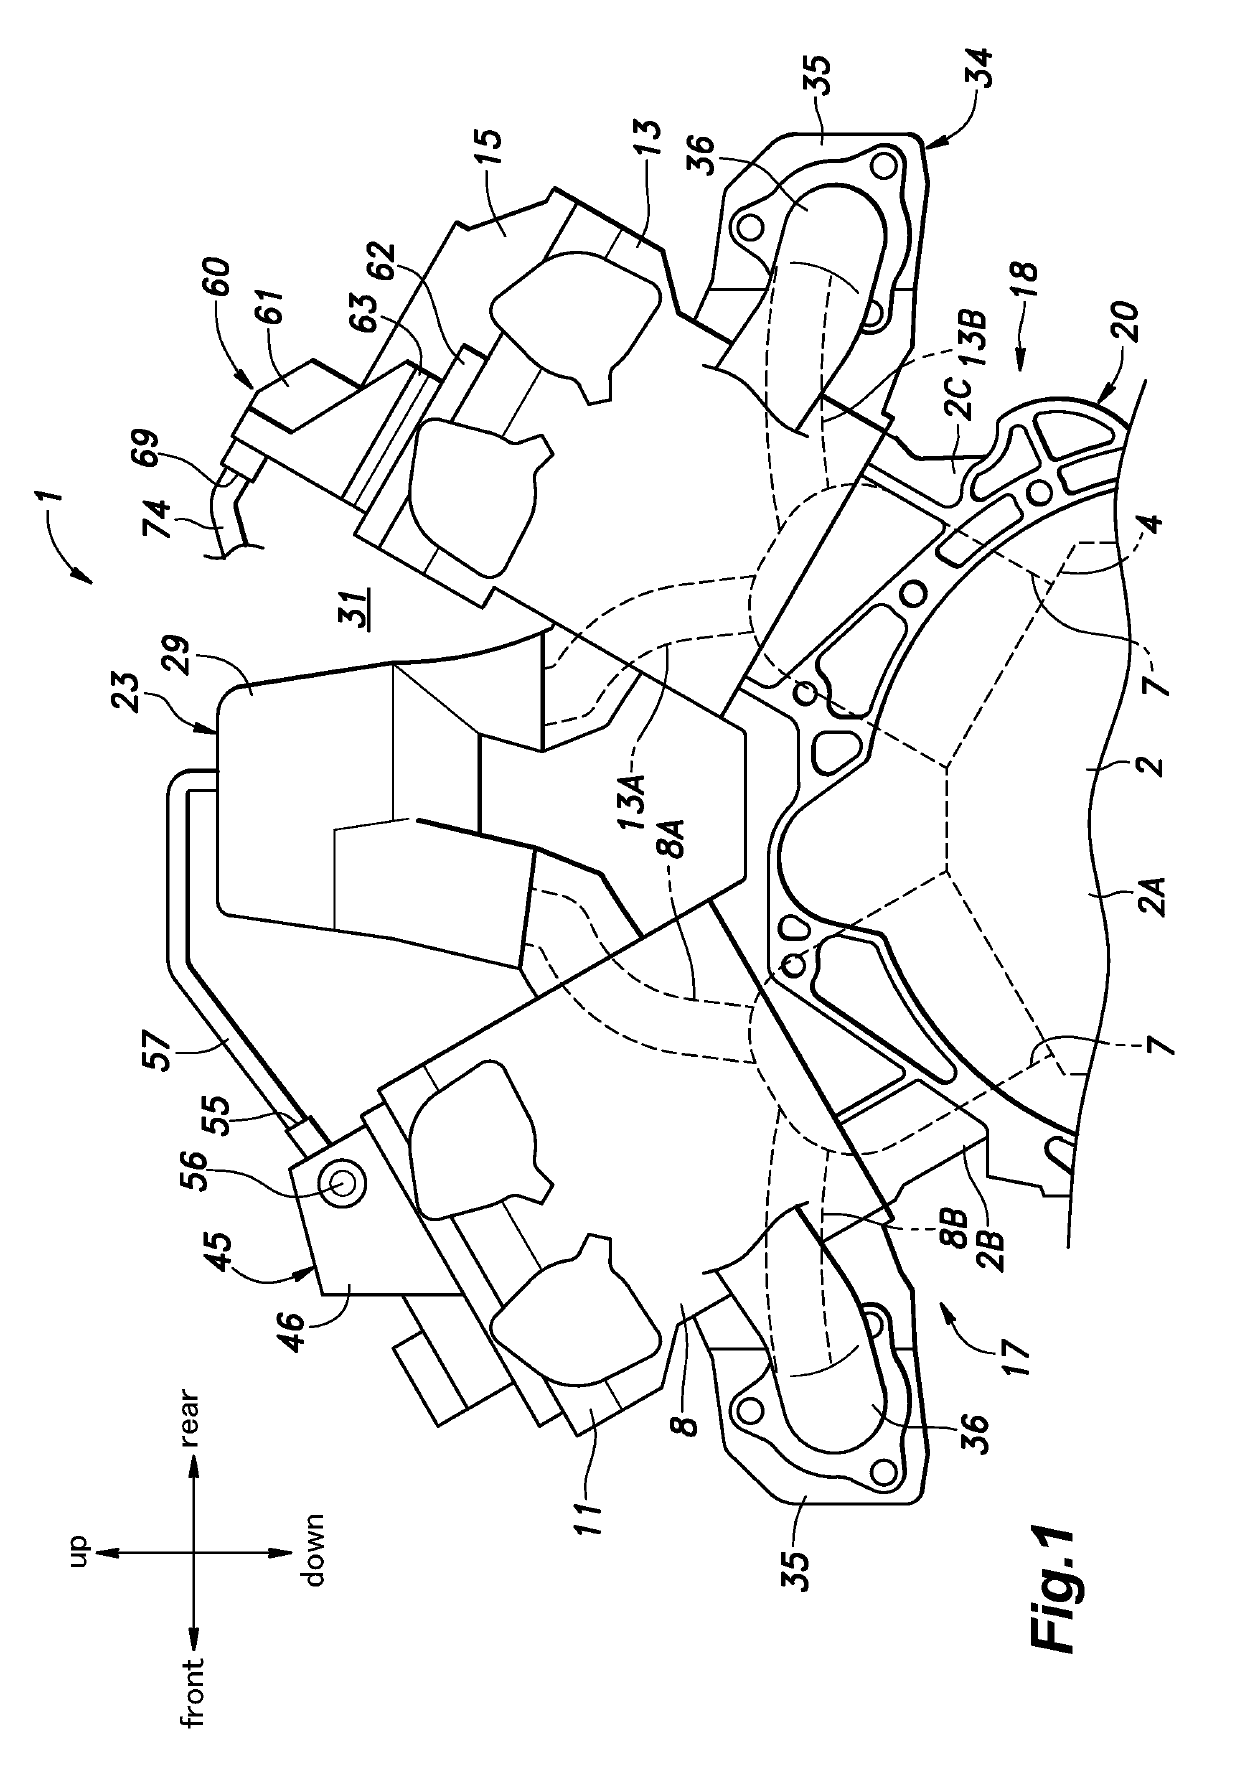 Internal combustion engine with gas-liquid separator for blowby gas